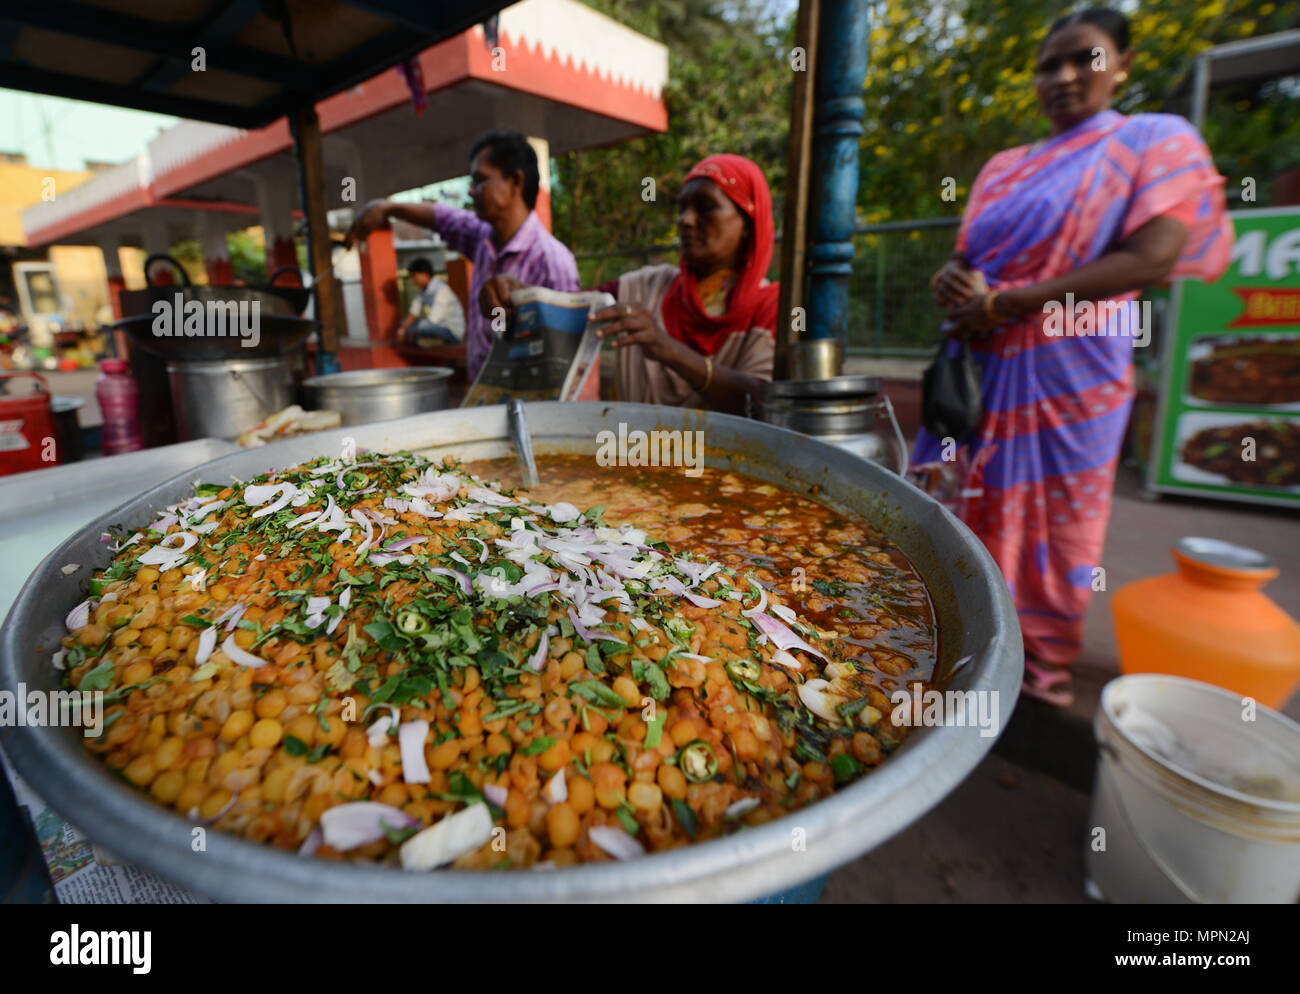 A pot of Chickpea curry at a street food stall in Chennai, India. Stock Photo